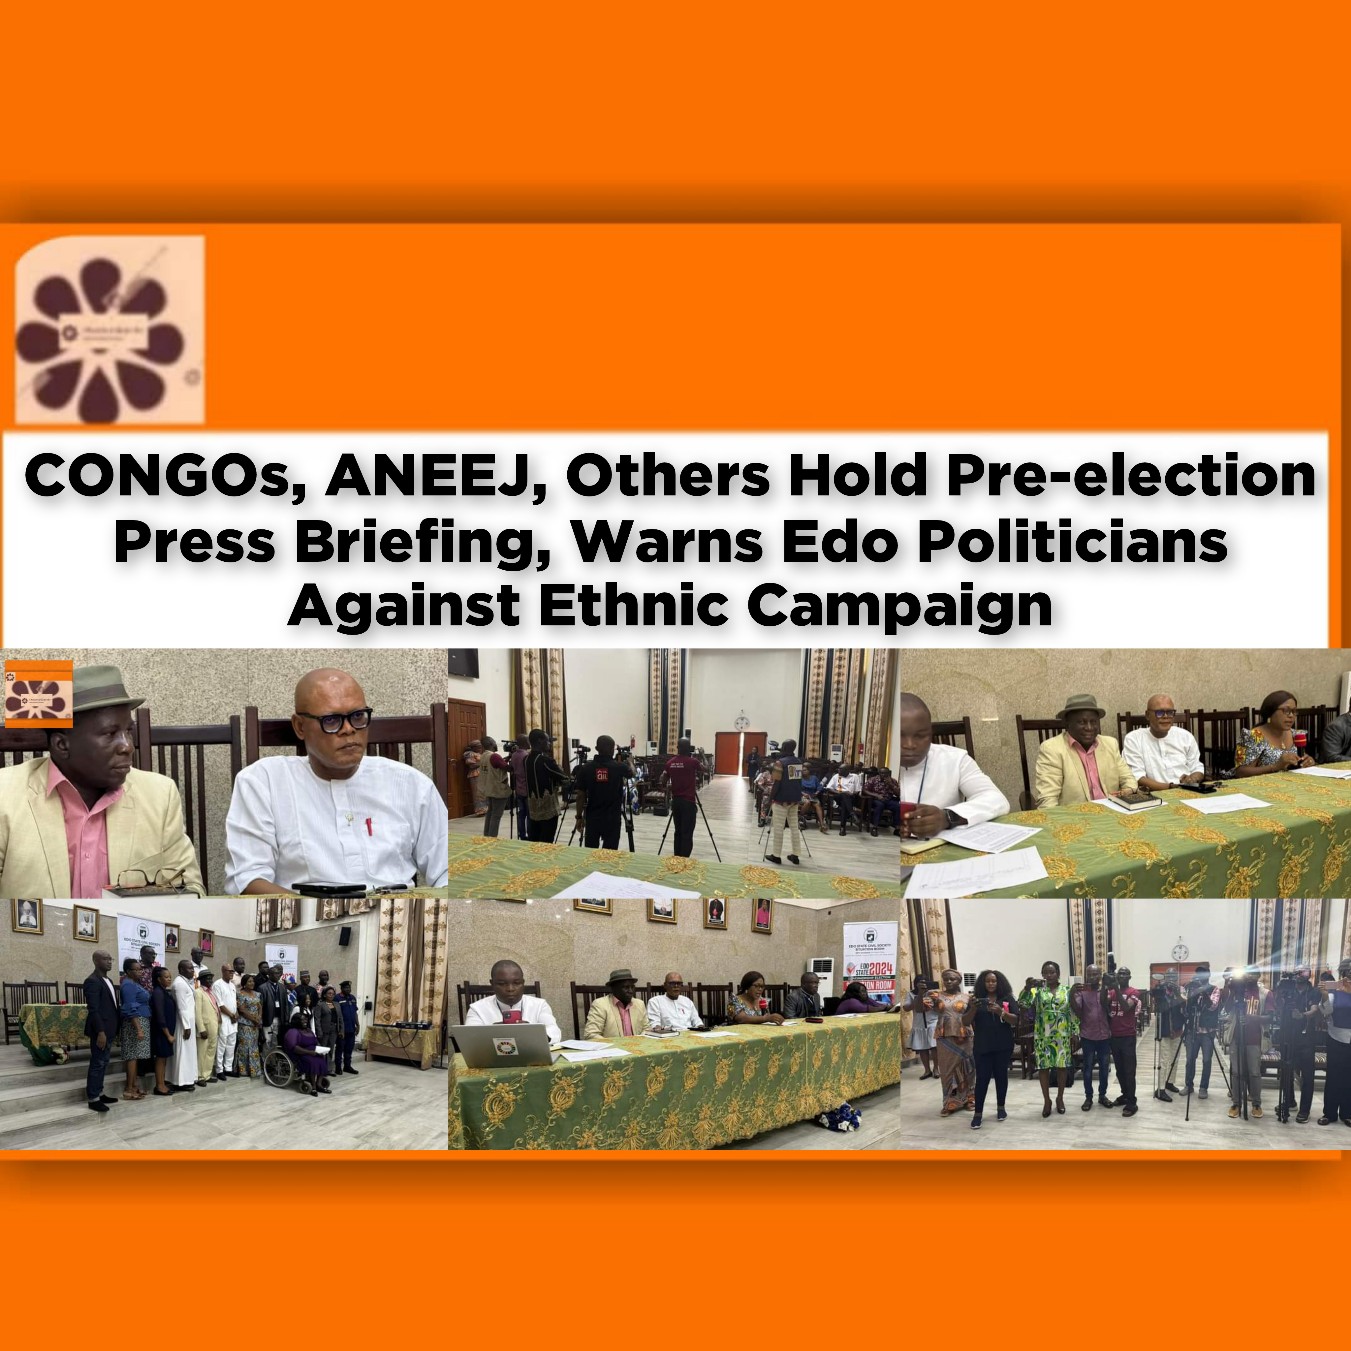 CONGOs, ANEEJ, Others Hold Pre-election Press Briefing, Warns Edo Politicians Against Ethnic Campaign ~ OsazuwaAkonedo #Adeleke